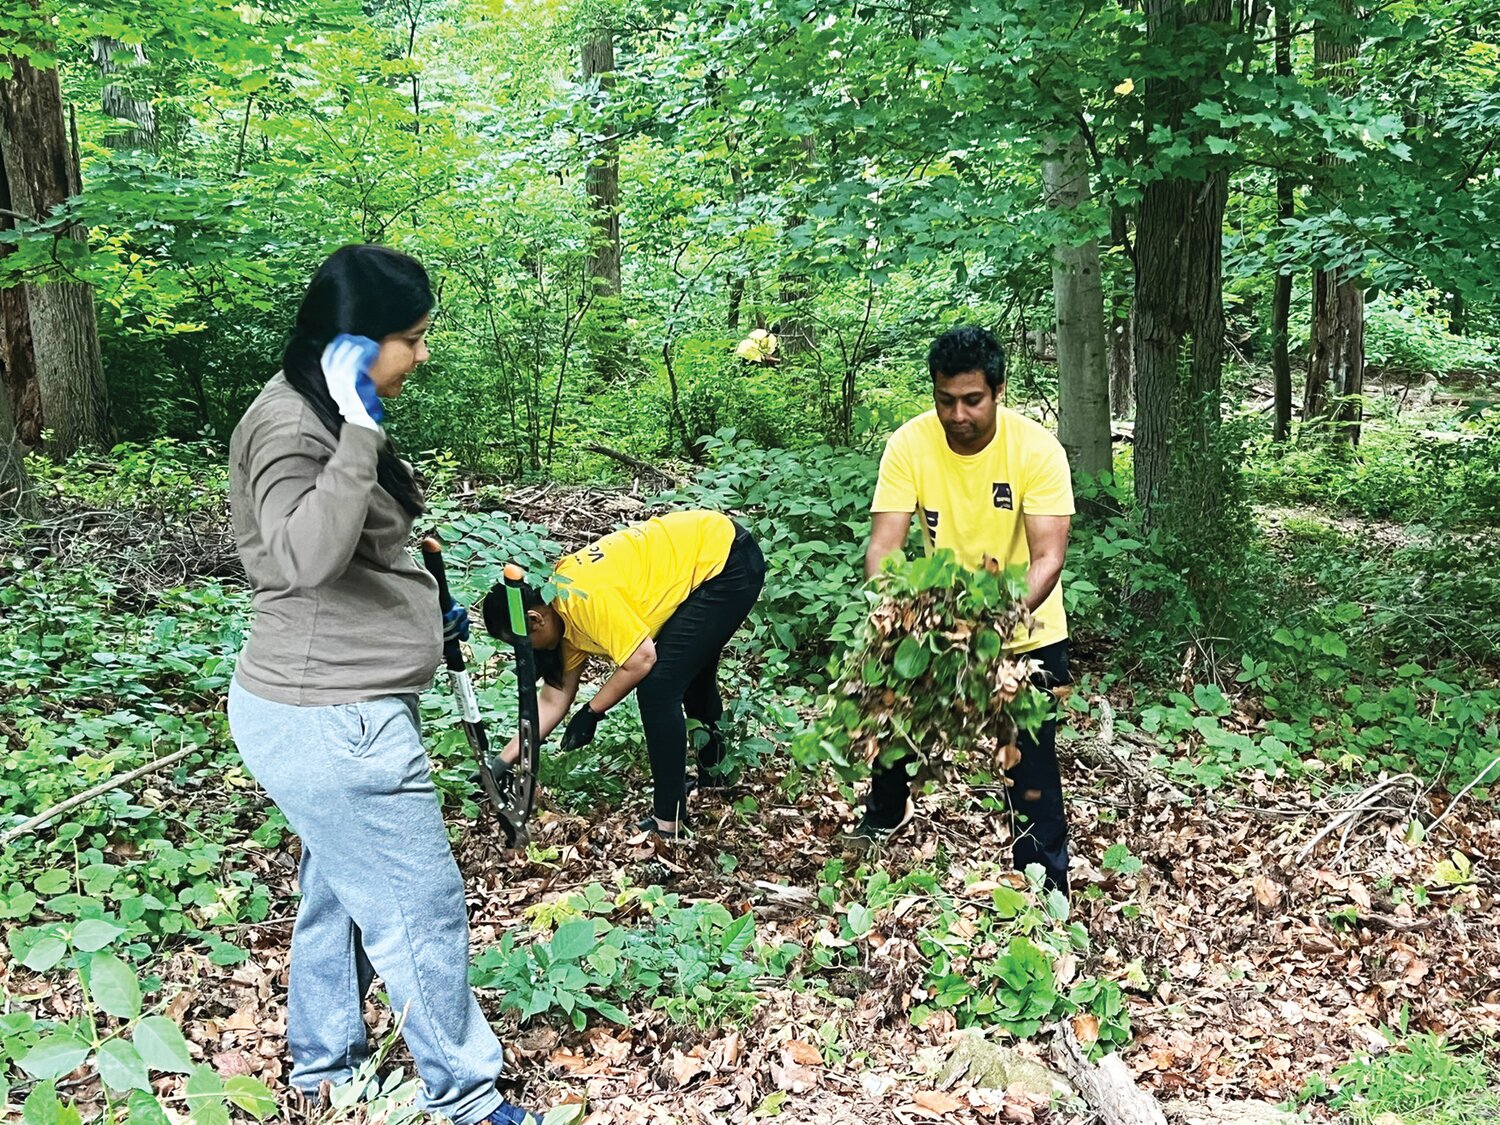 Workers identified and removed several invasive species from a forest in Lambertville recently.